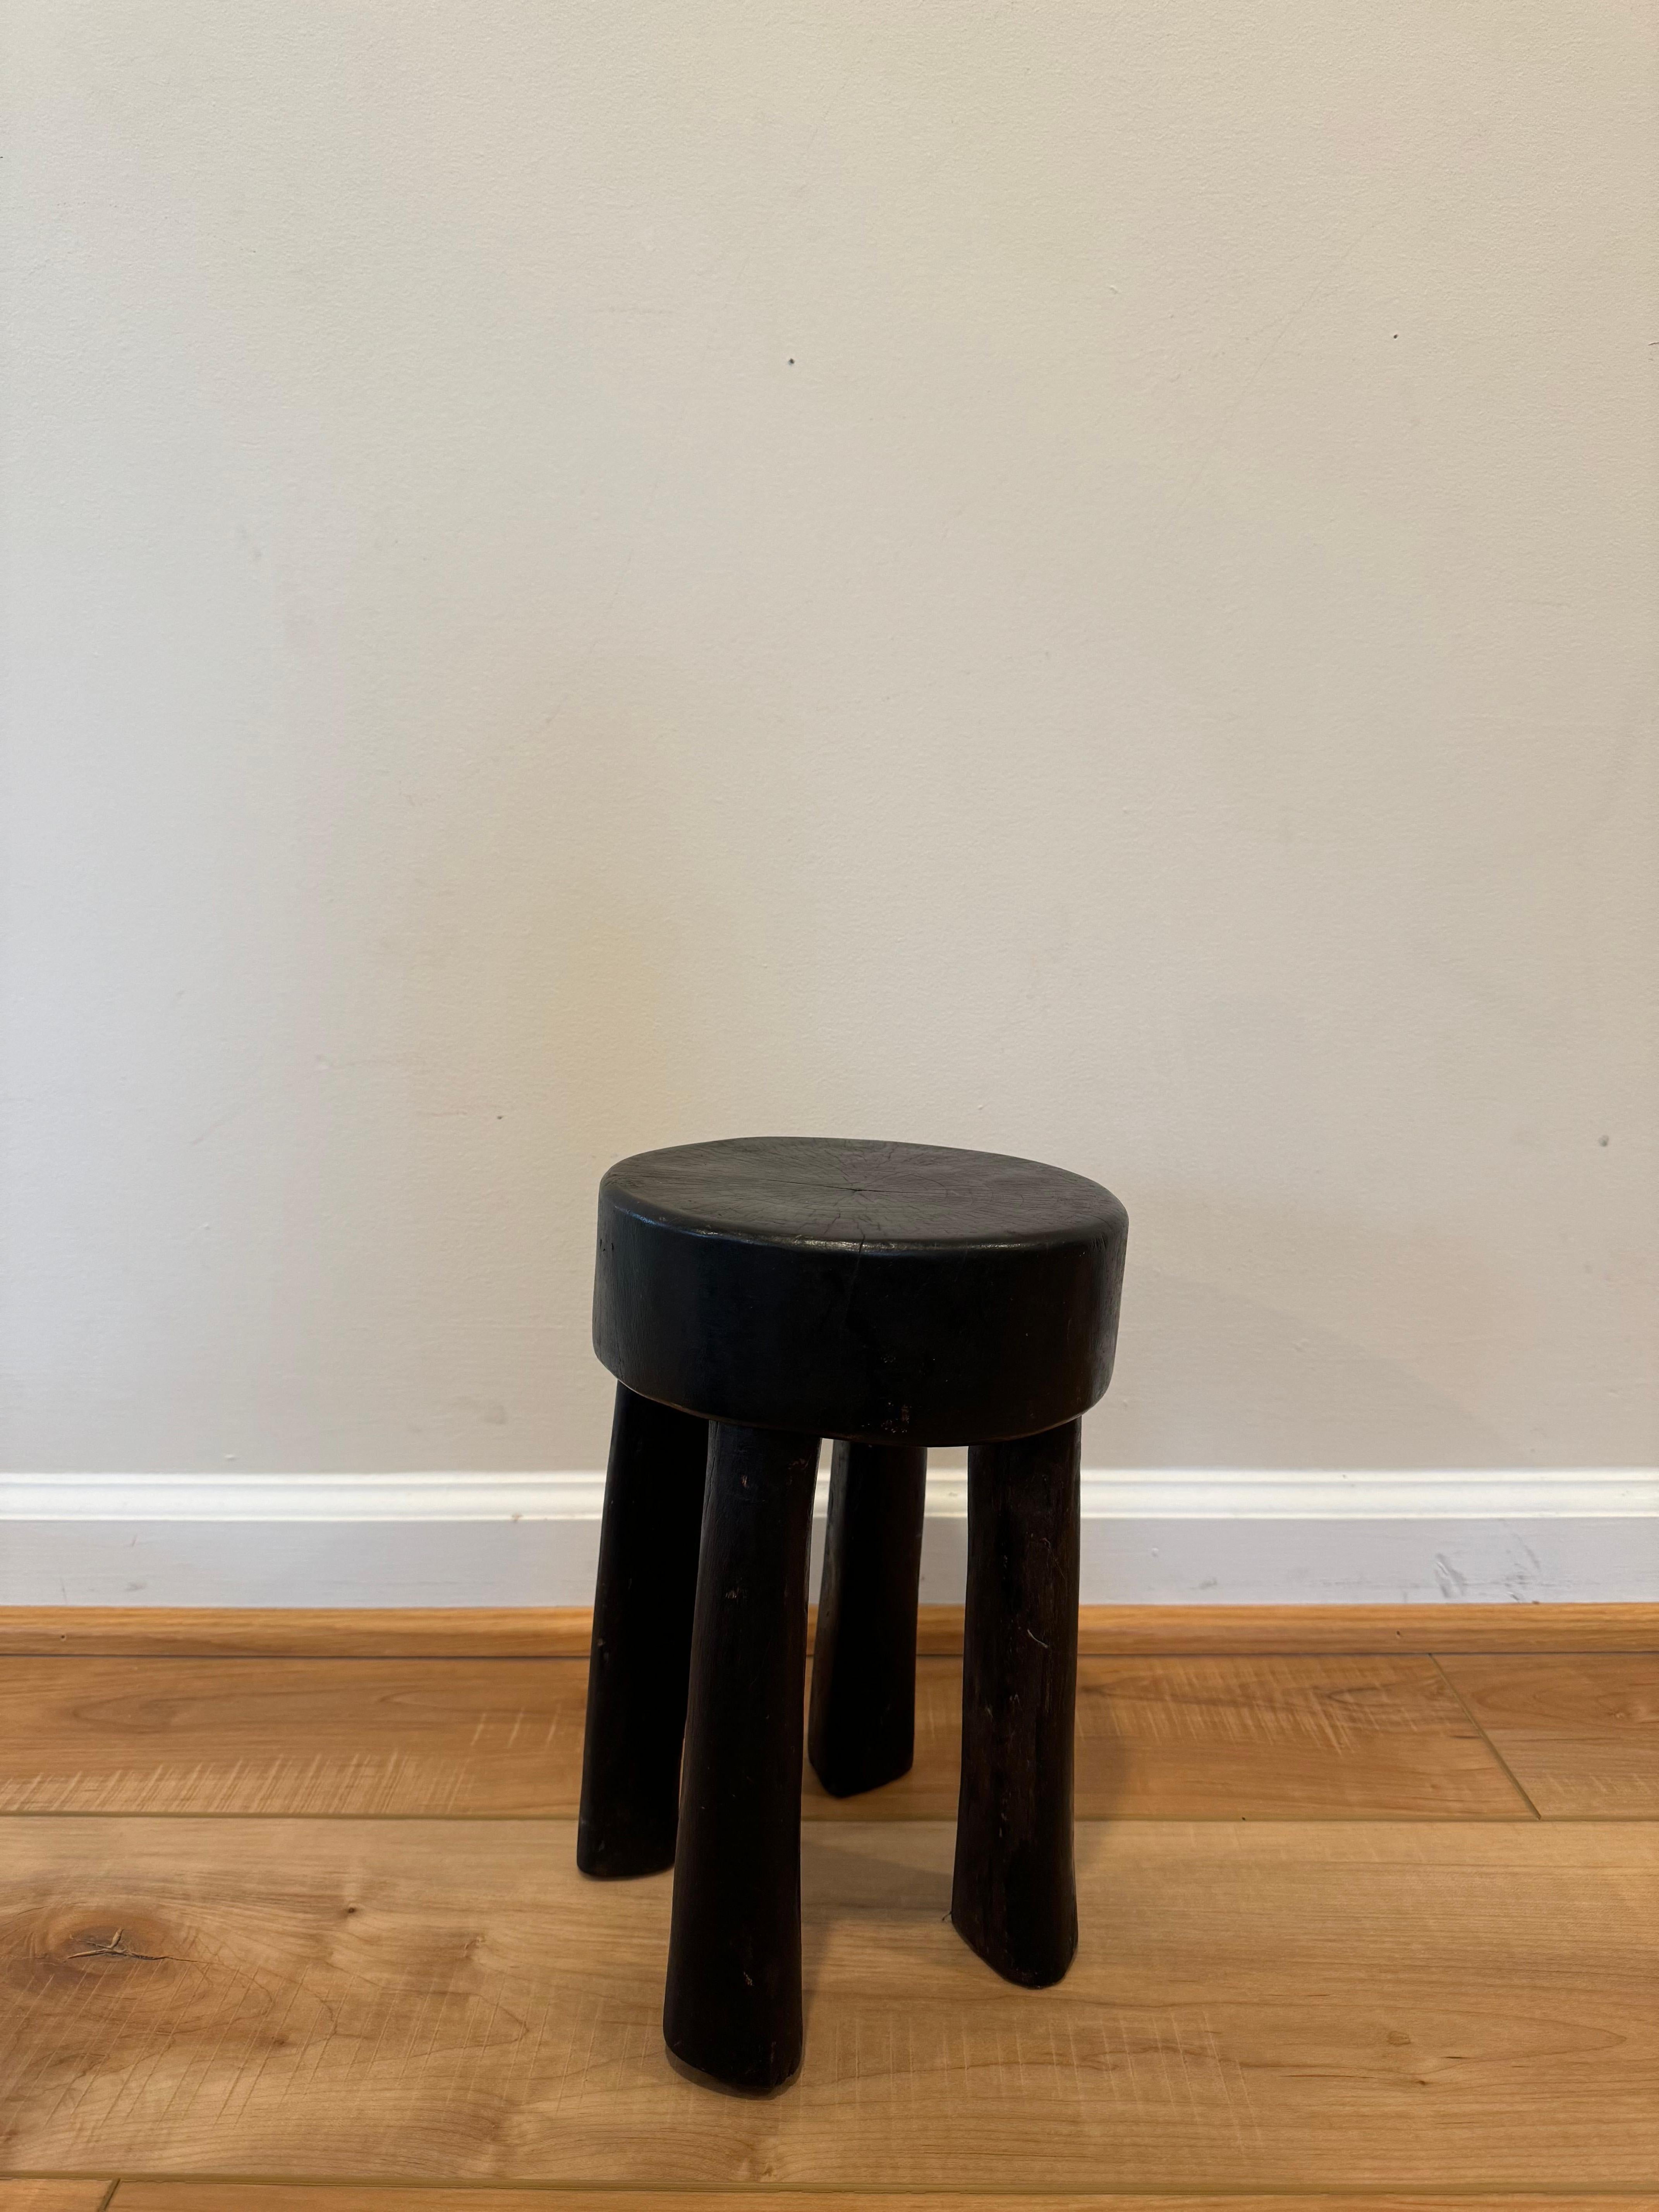 These Senufo stools are hand carved from hardwood by the Senufo Tribe in the Ivory Coast. 

Senufo stools are known for their stocky tapered legs and concave tops and are traditionally carved from one block of wood. 

Artisan crafted and due to its